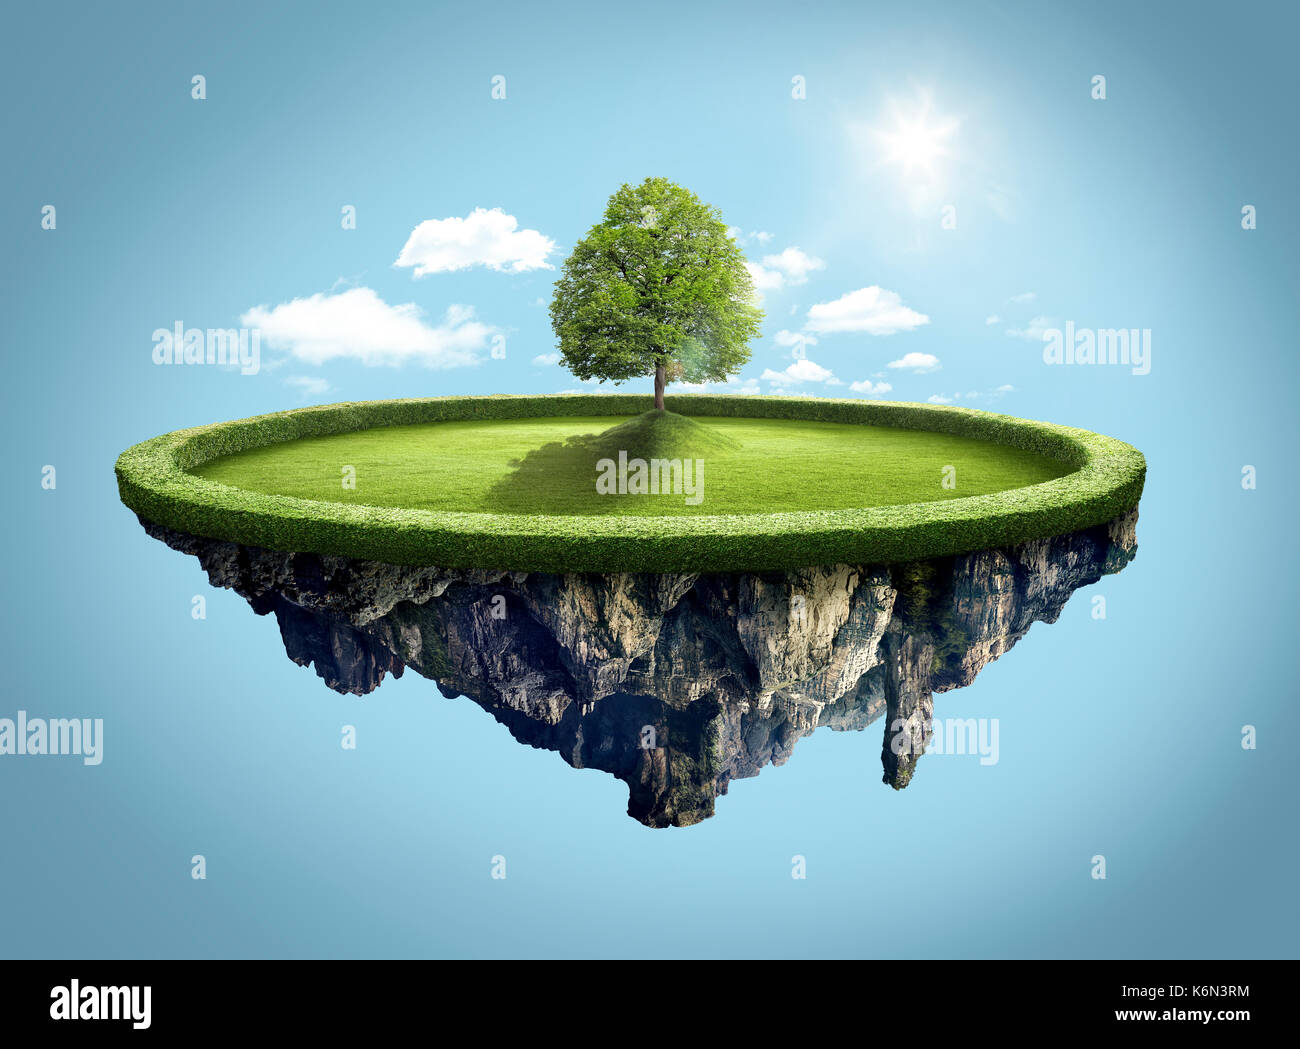 Amazing island with tree floating in the air under clouds and lovely sun ray Stock Photo